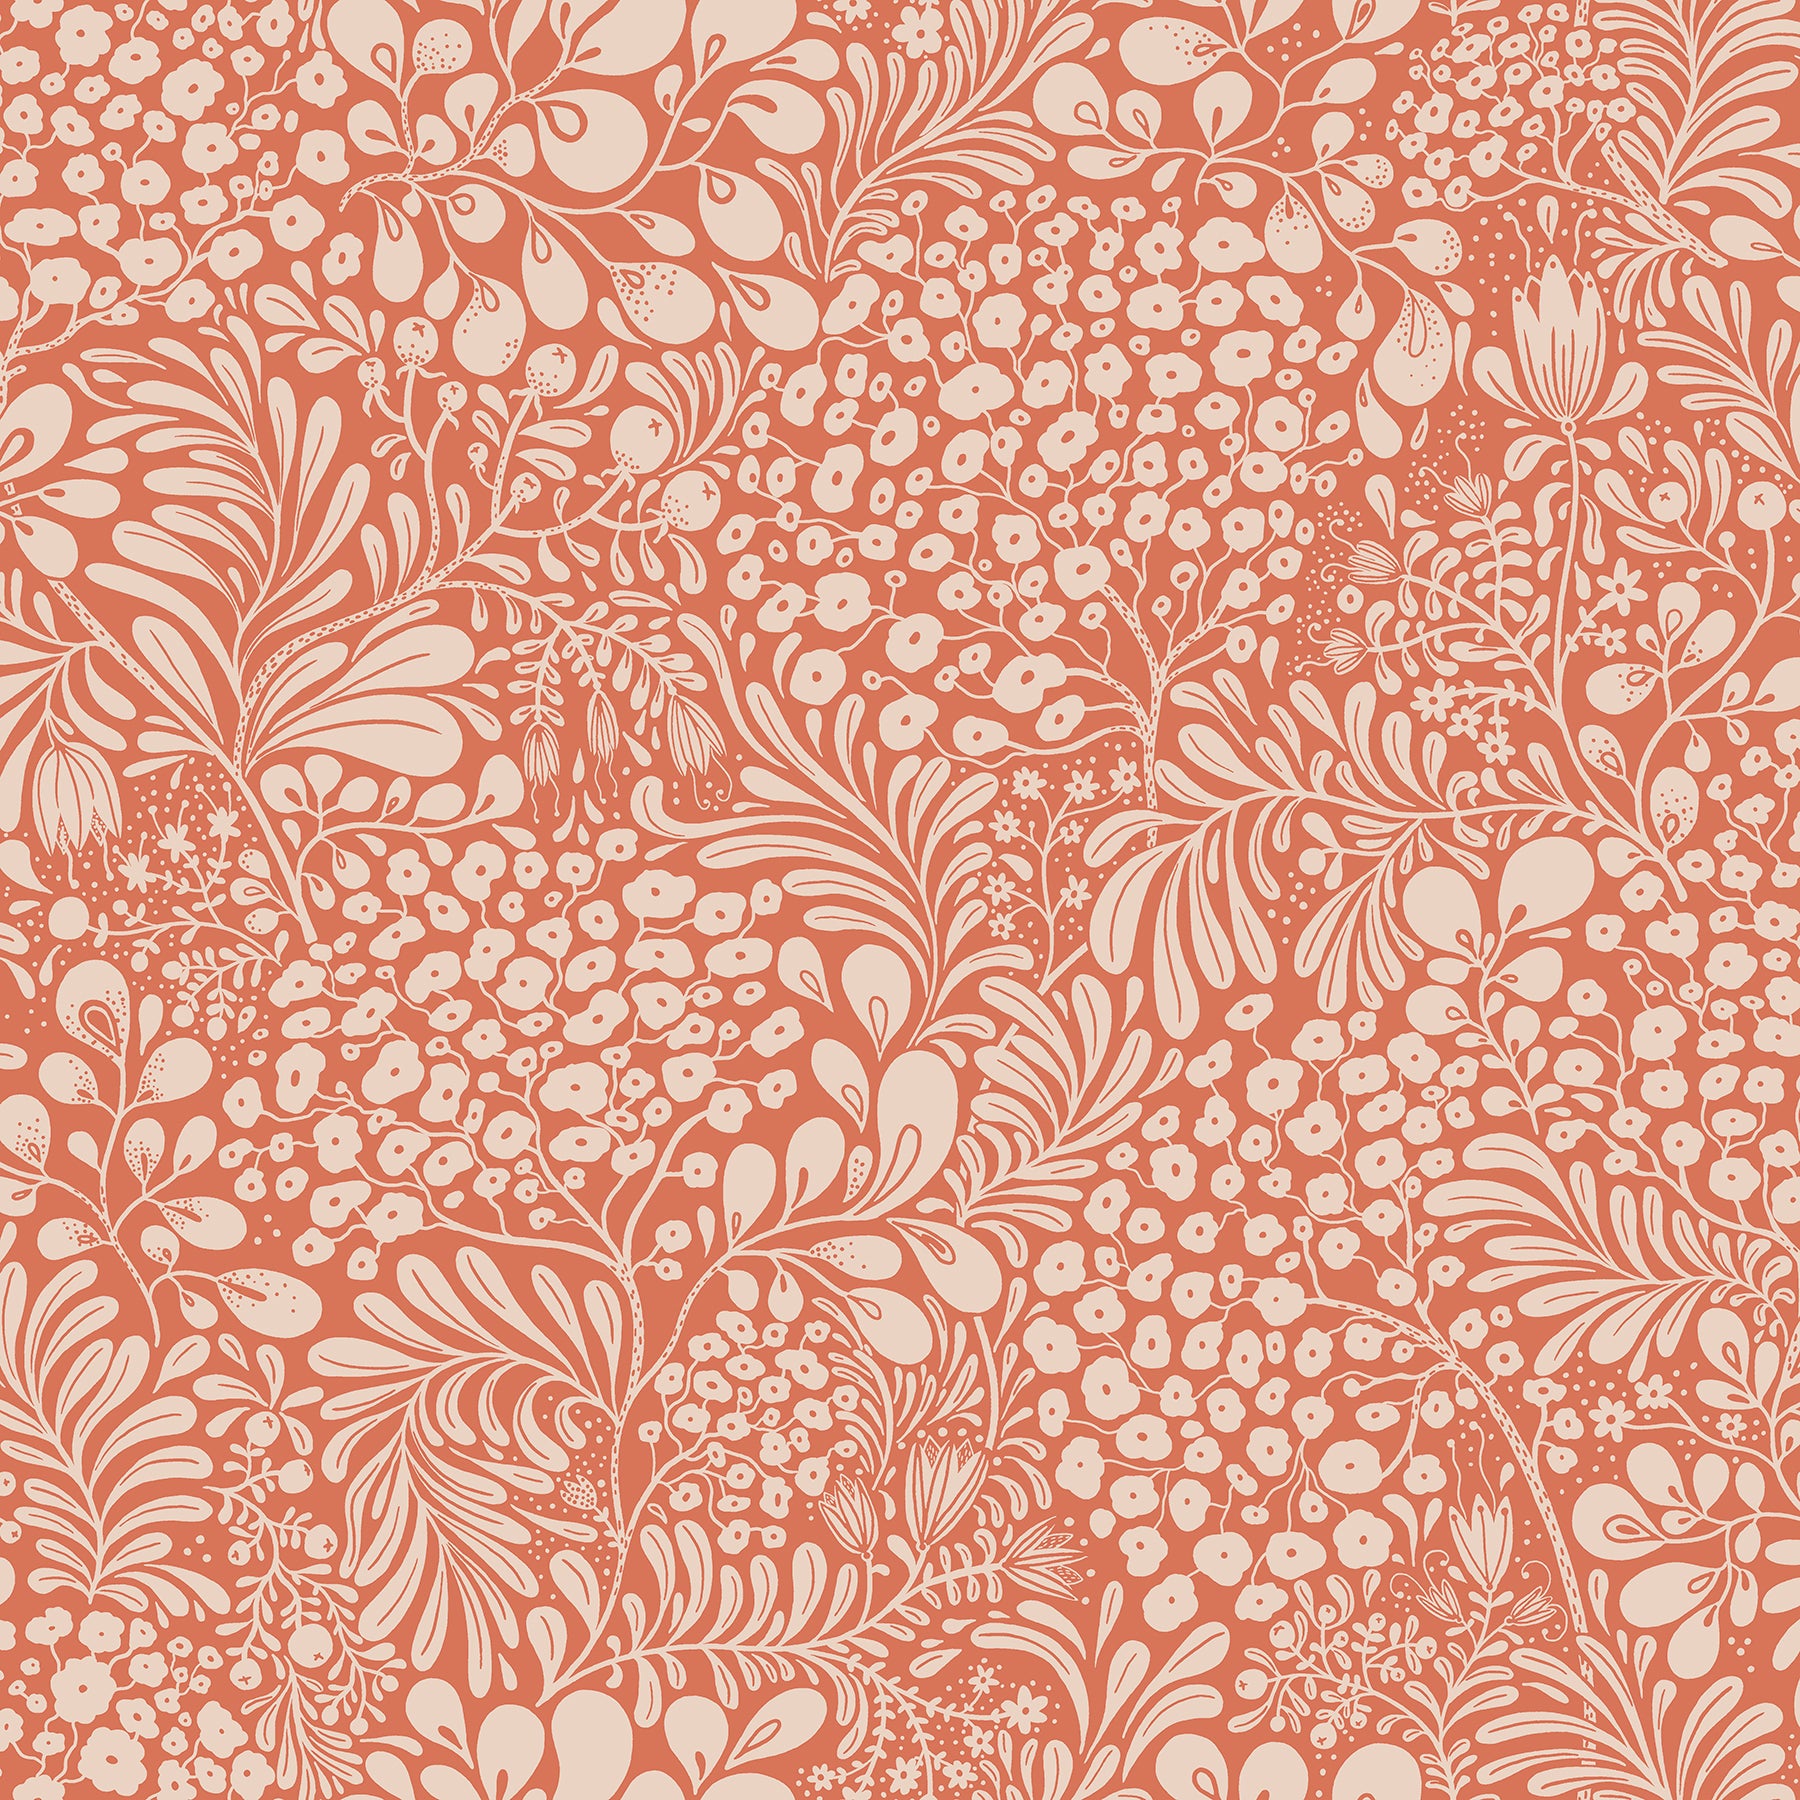 View 2932-65133 Lina Siv Red Botanical Red A-Street Prints Wallpaper